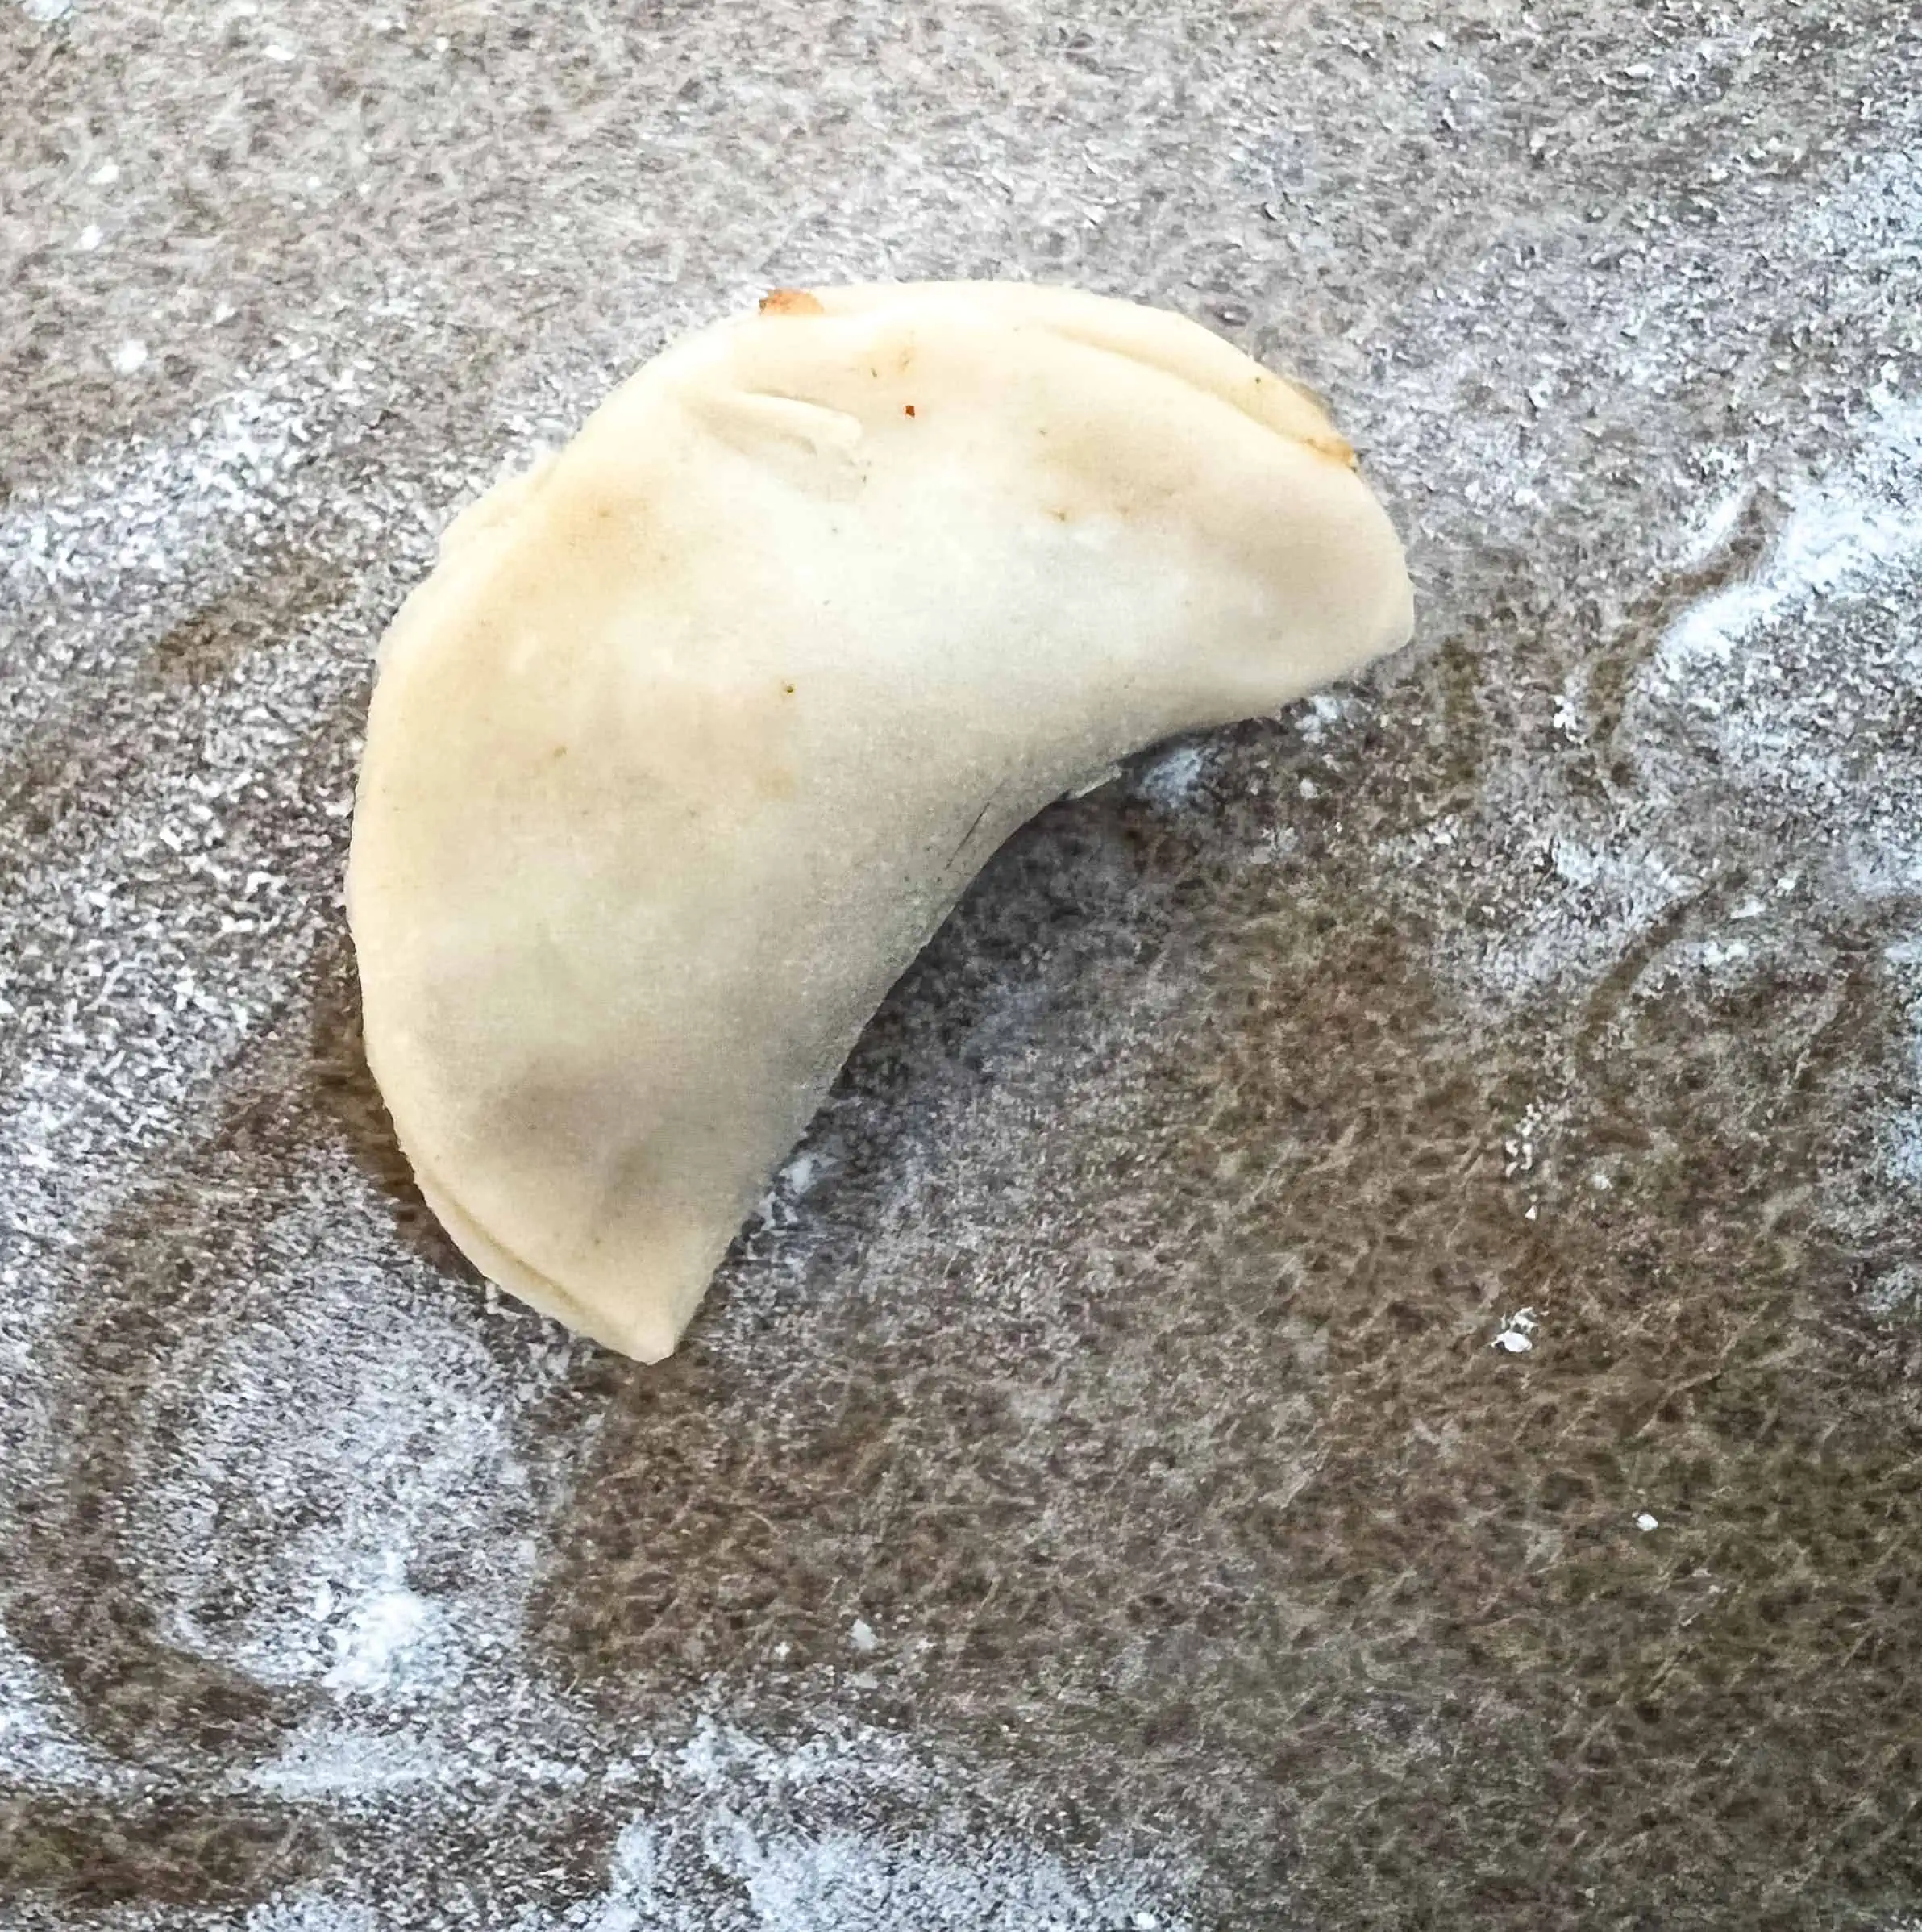 An empanada with pinched edges.